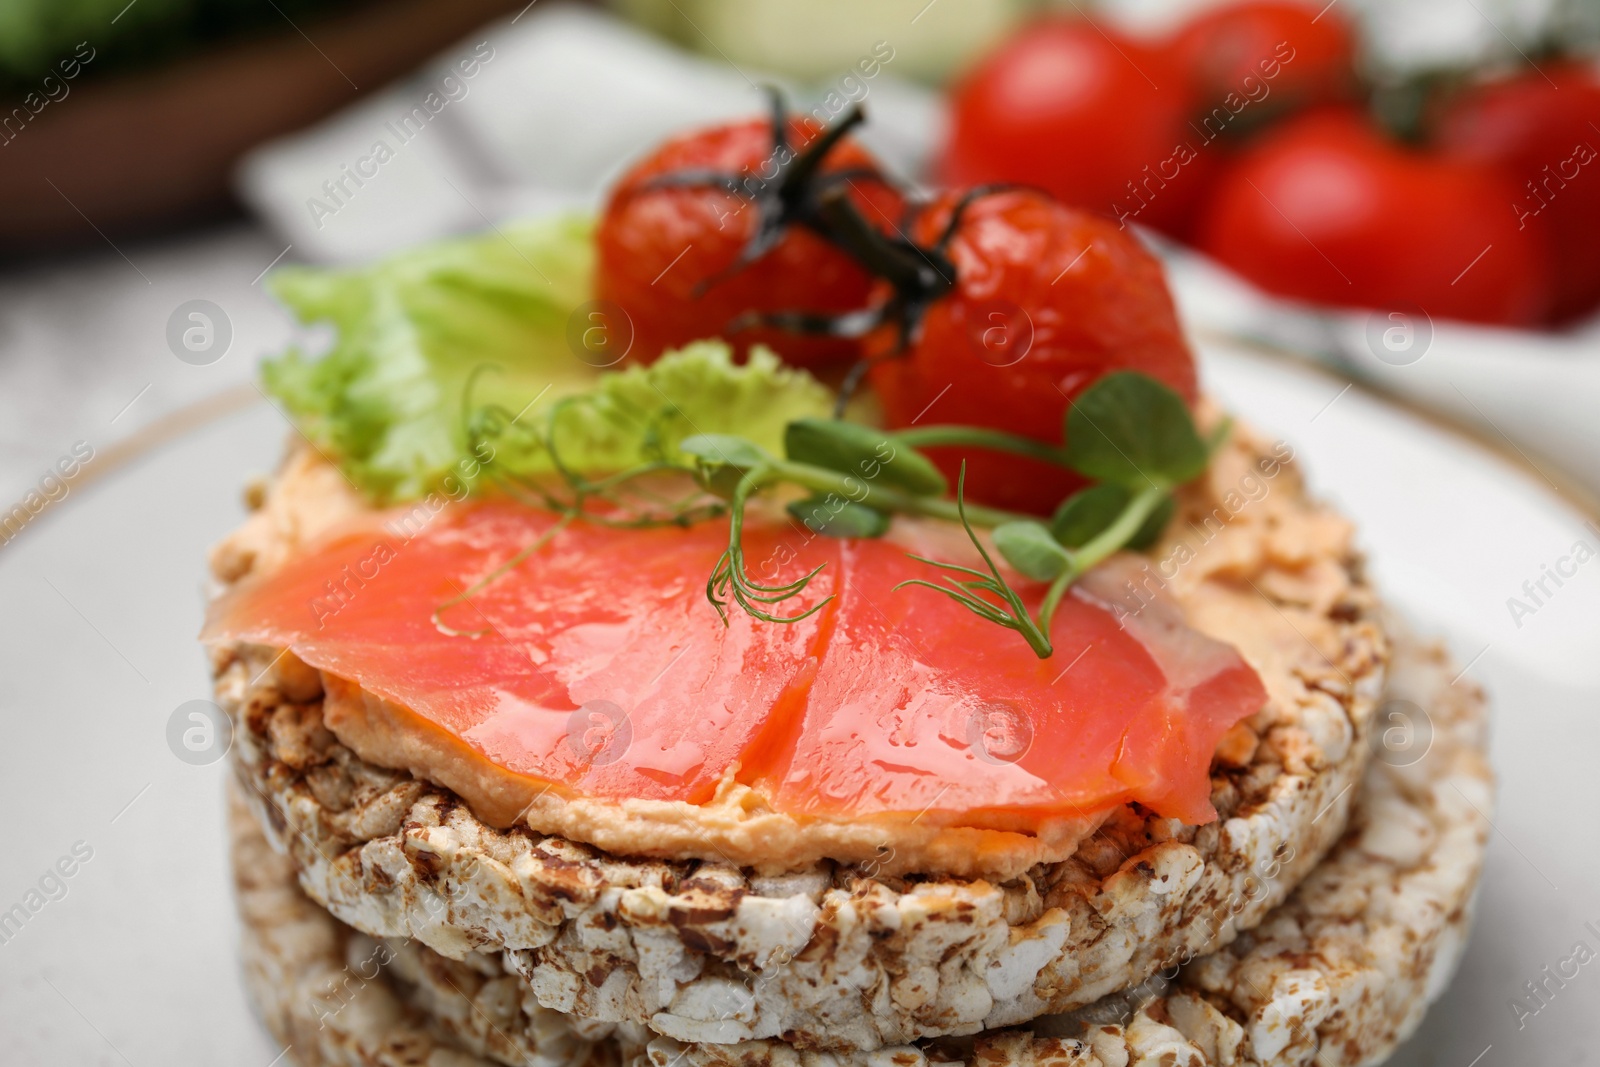 Photo of Crunchy buckwheat cakes with salmon, tomatoes and greens on plate, closeup